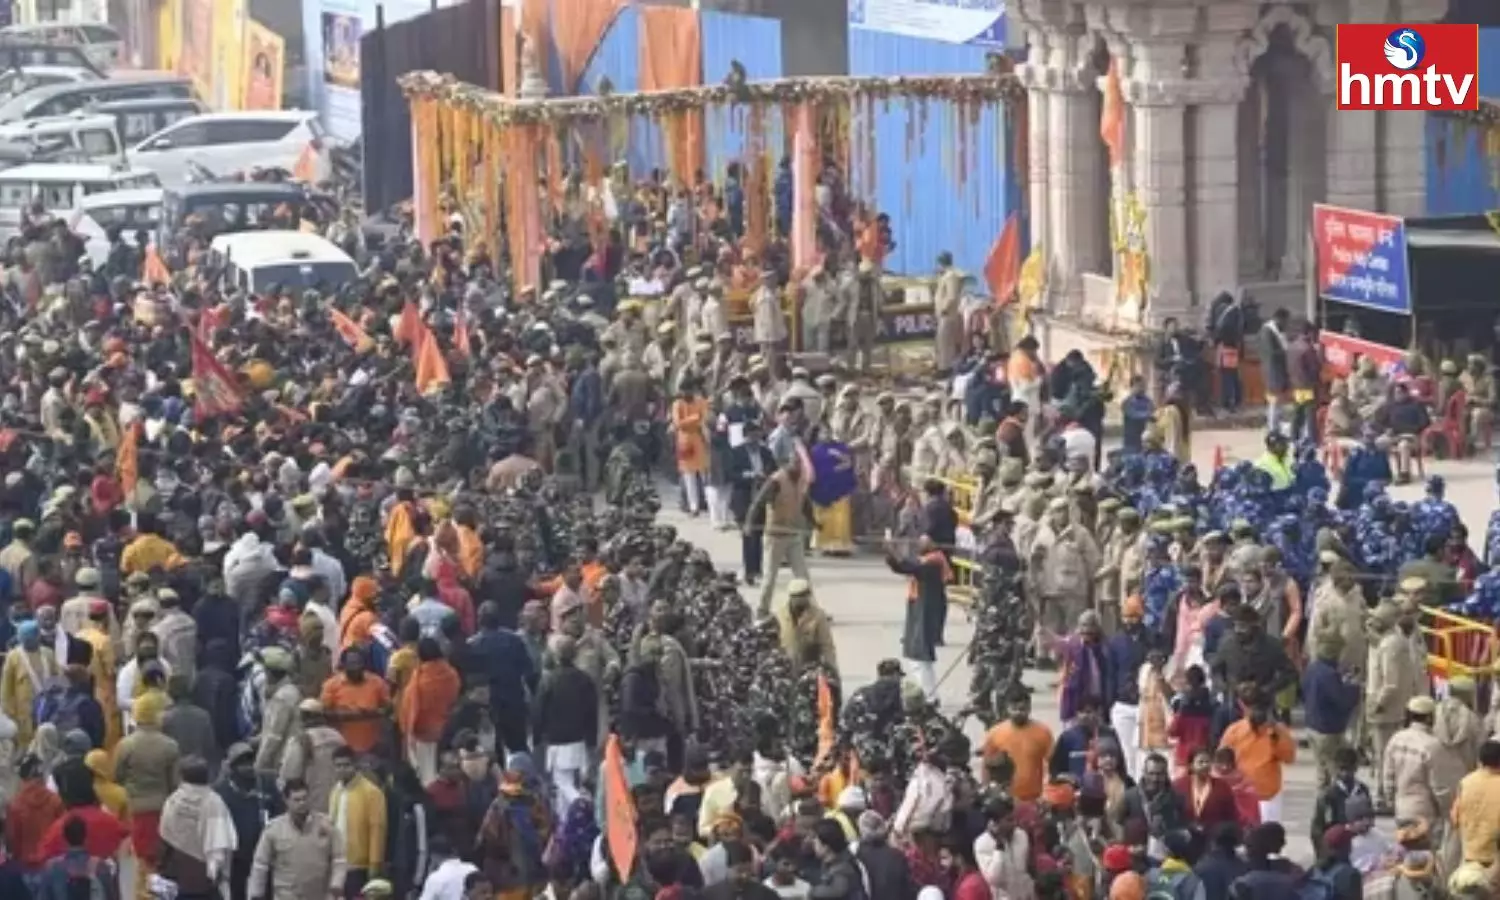 Devotees break barricades as they try to enter Ram Temple In Ayodhya